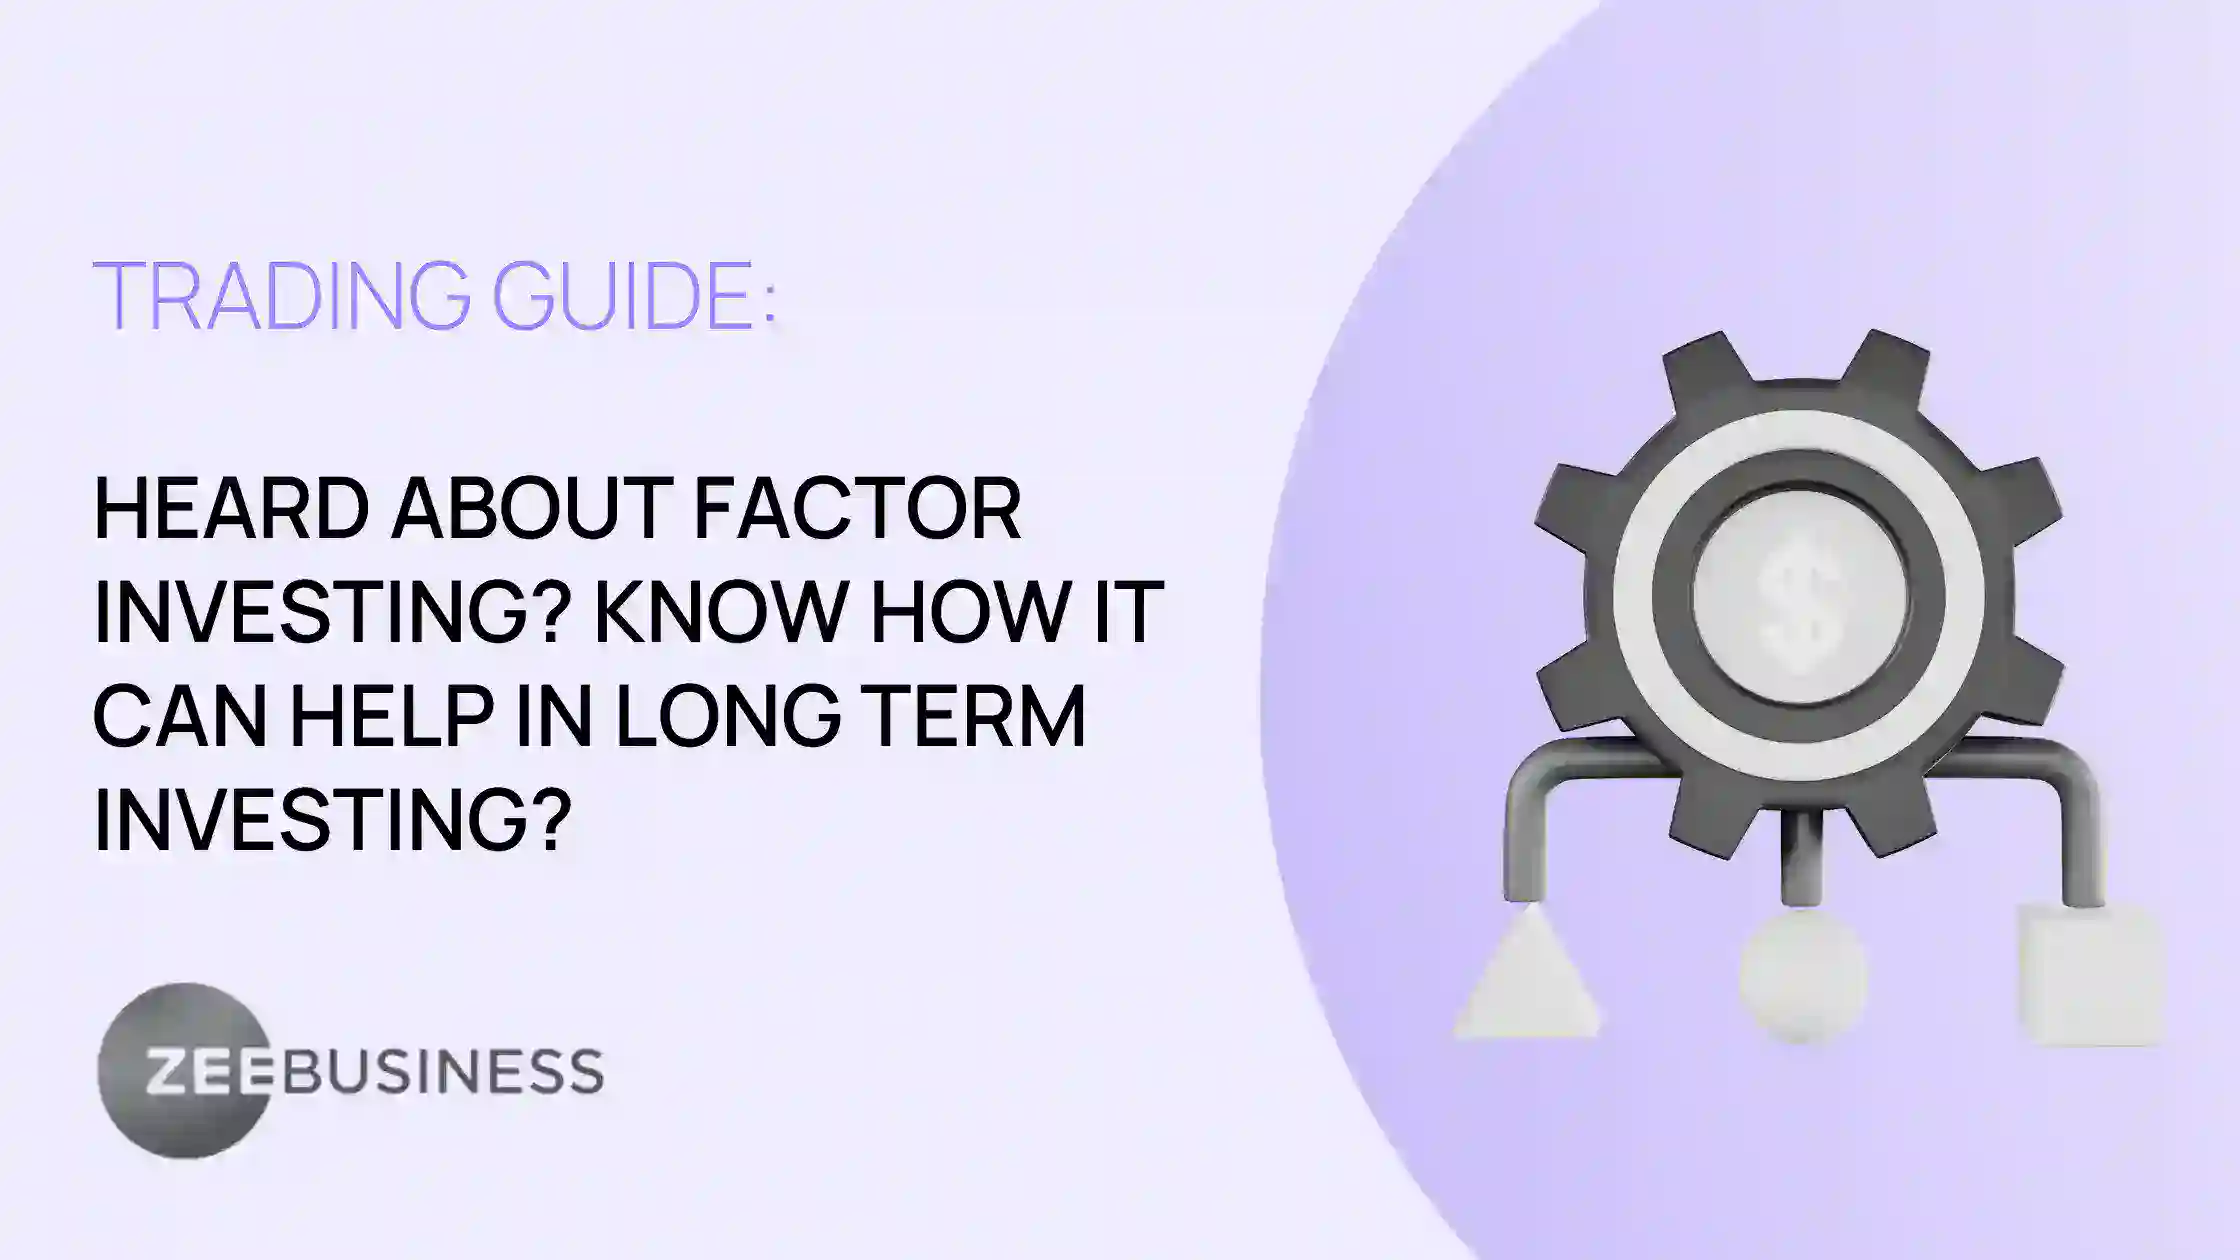 Trading Guide: Heard about Factor Investing? Know how it can help in long term investing?